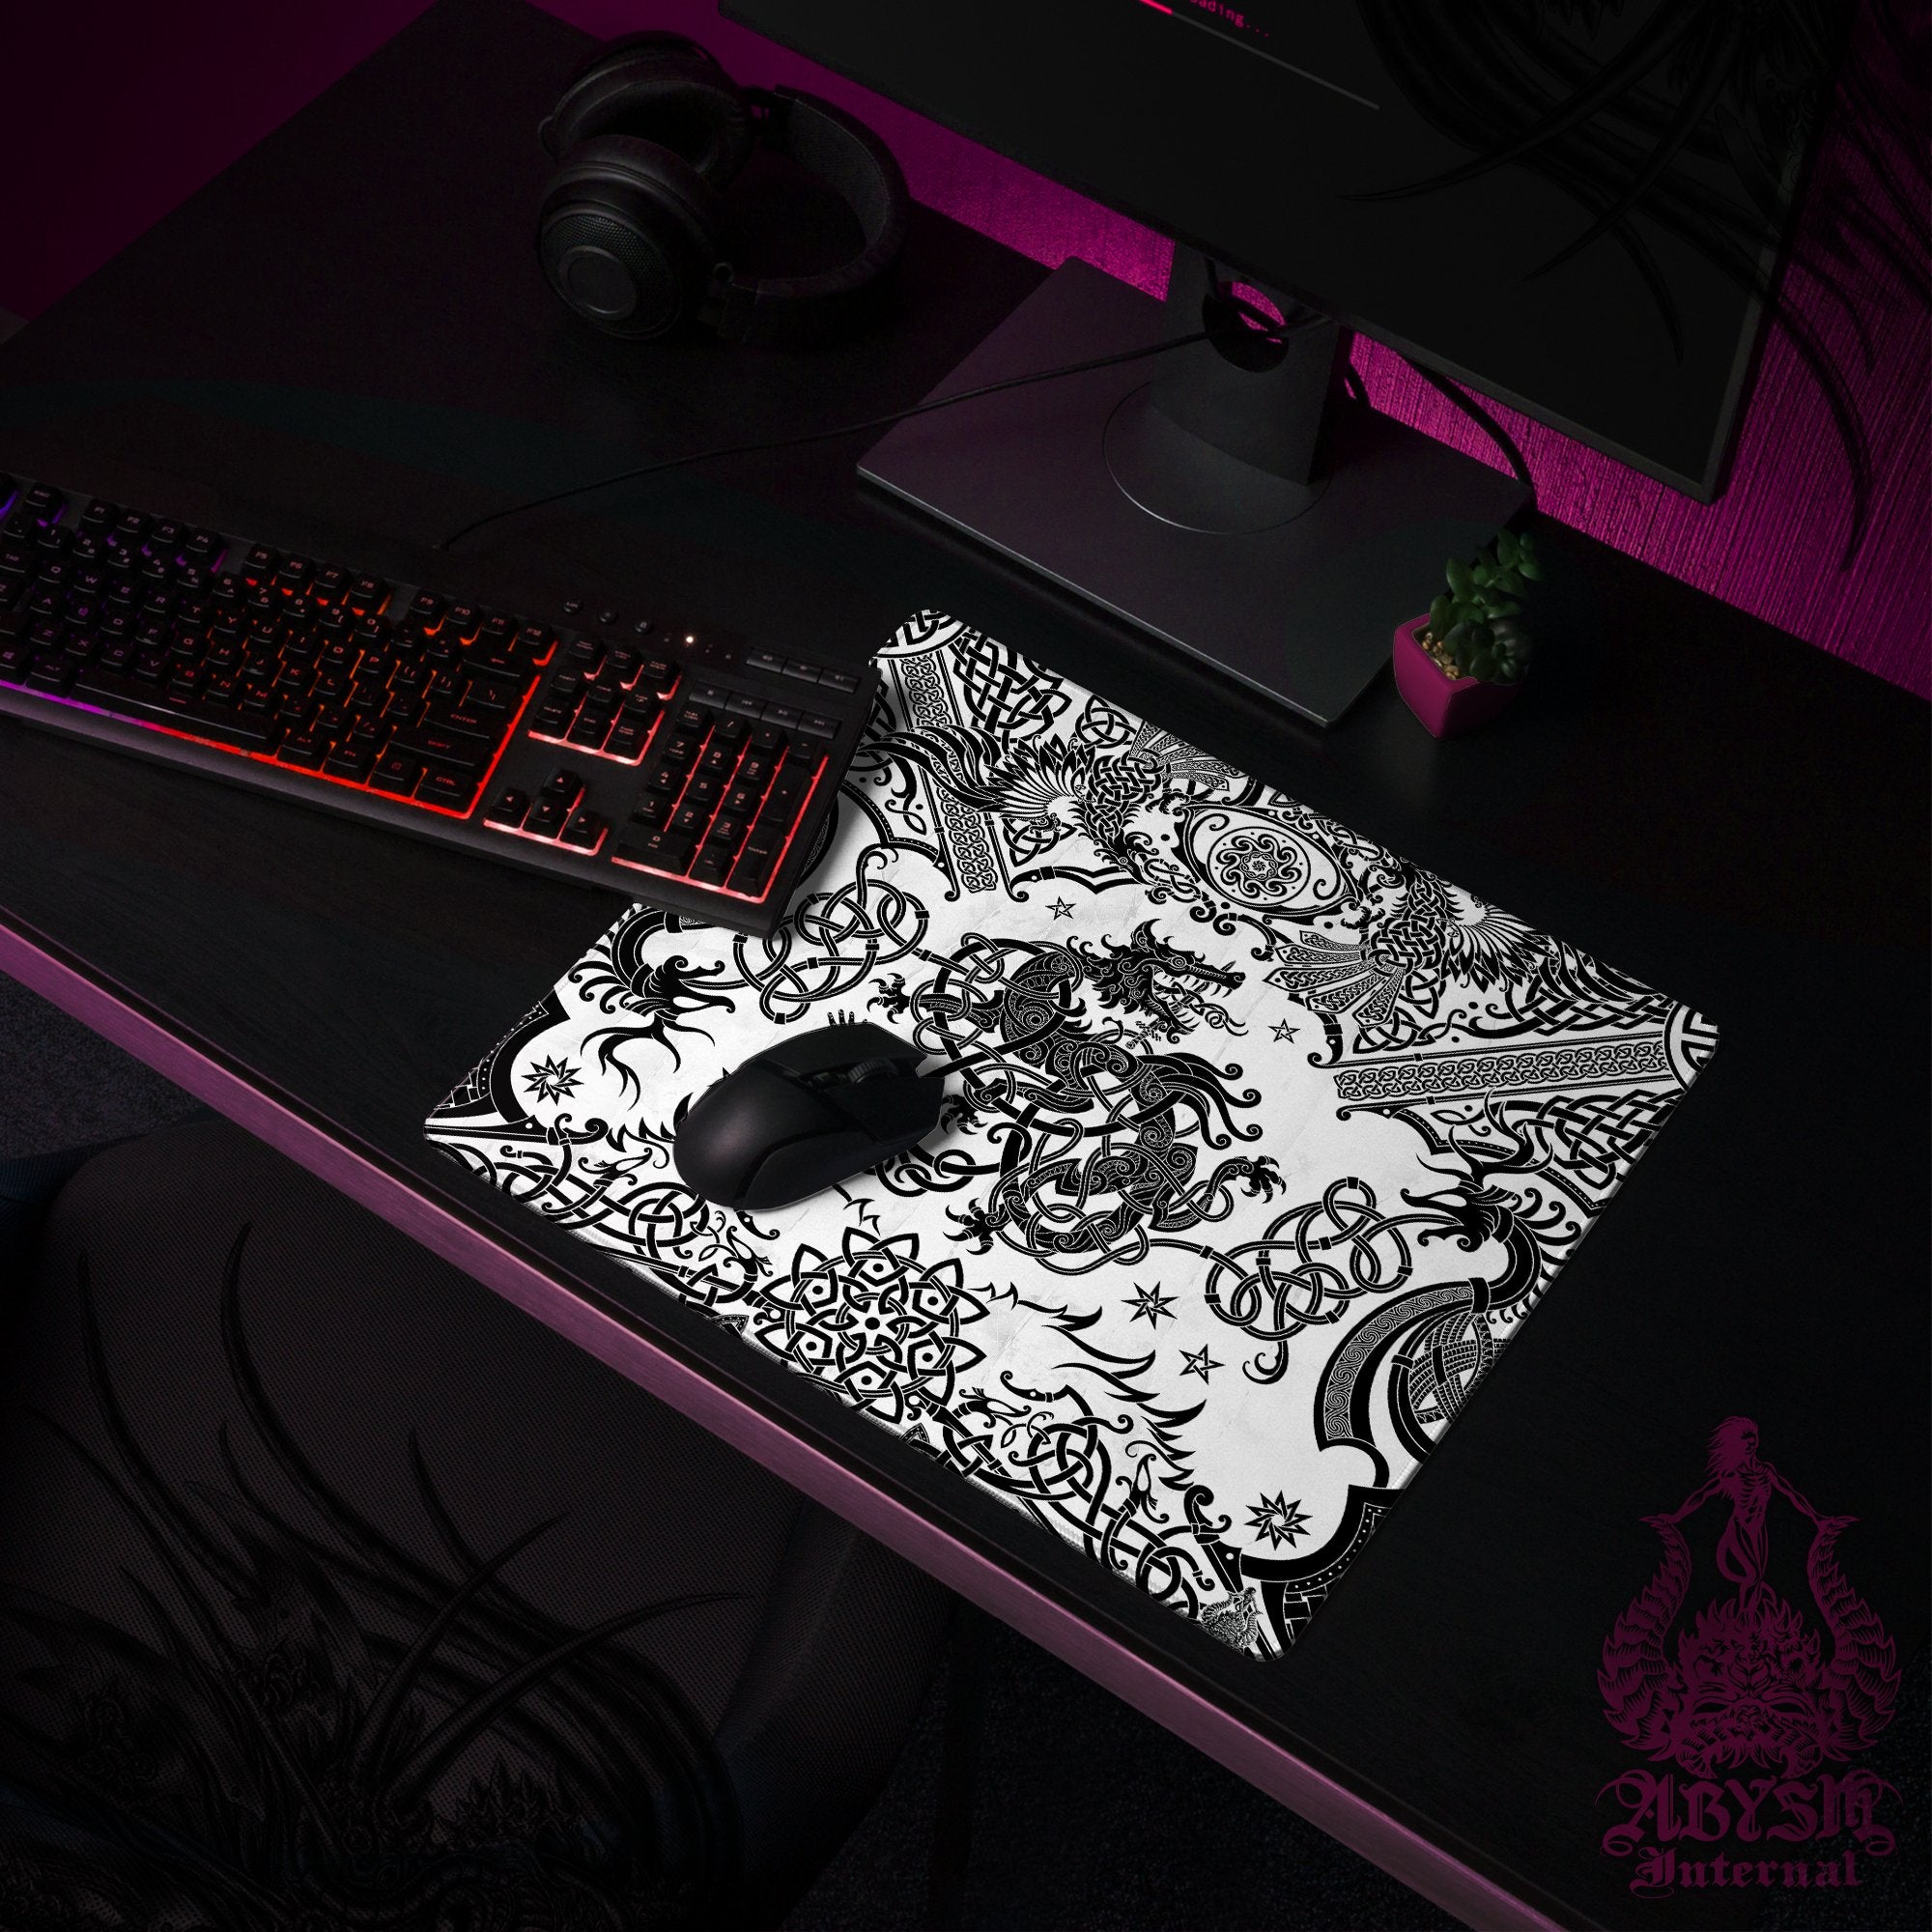 Fenrir Mouse Pad, Norse Wolf Gaming Desk Mat, Viking Workpad, Nordic Knotwork Table Protector Cover, Art Print - Black White - Abysm Internal